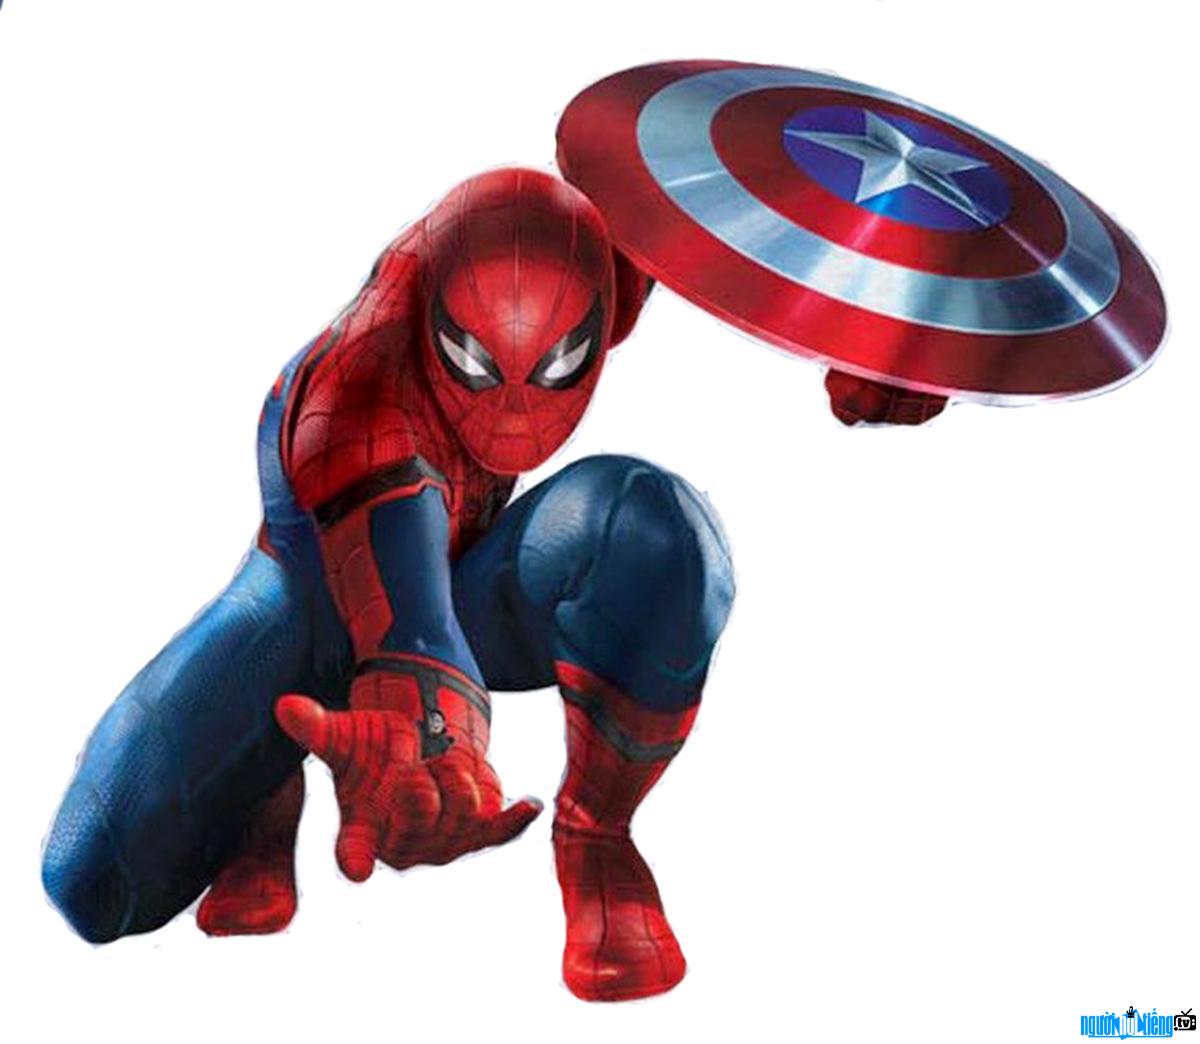 Another image of fictional character Spider Man - Spiderman